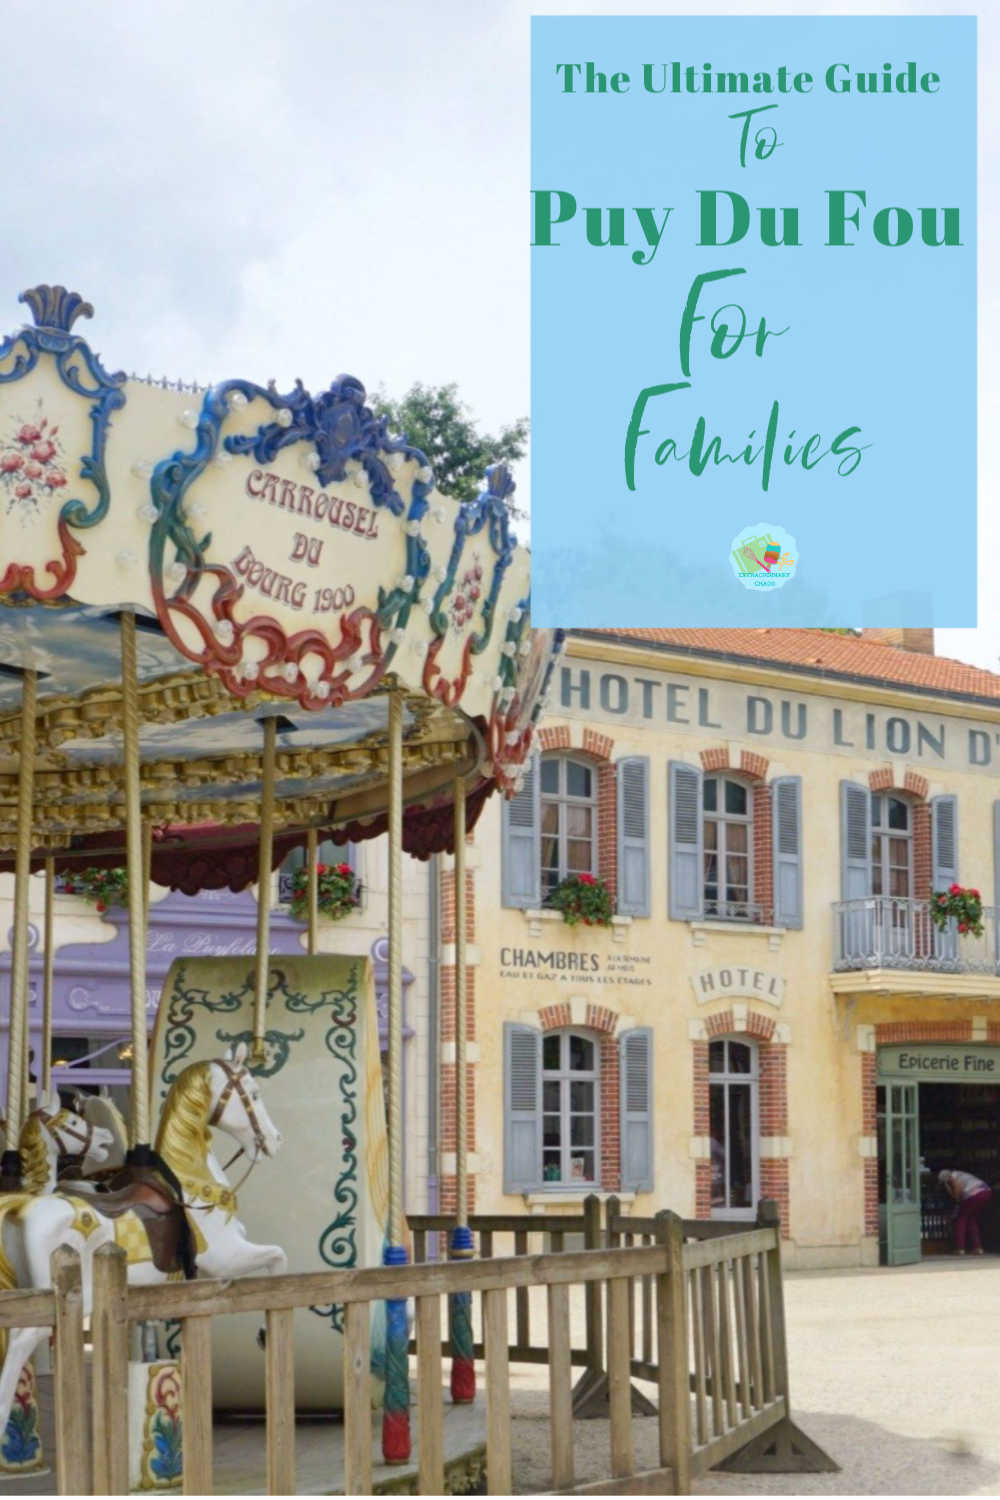 The Ultimate Guide To Visiting Puy Du Fou for families with kids and teens